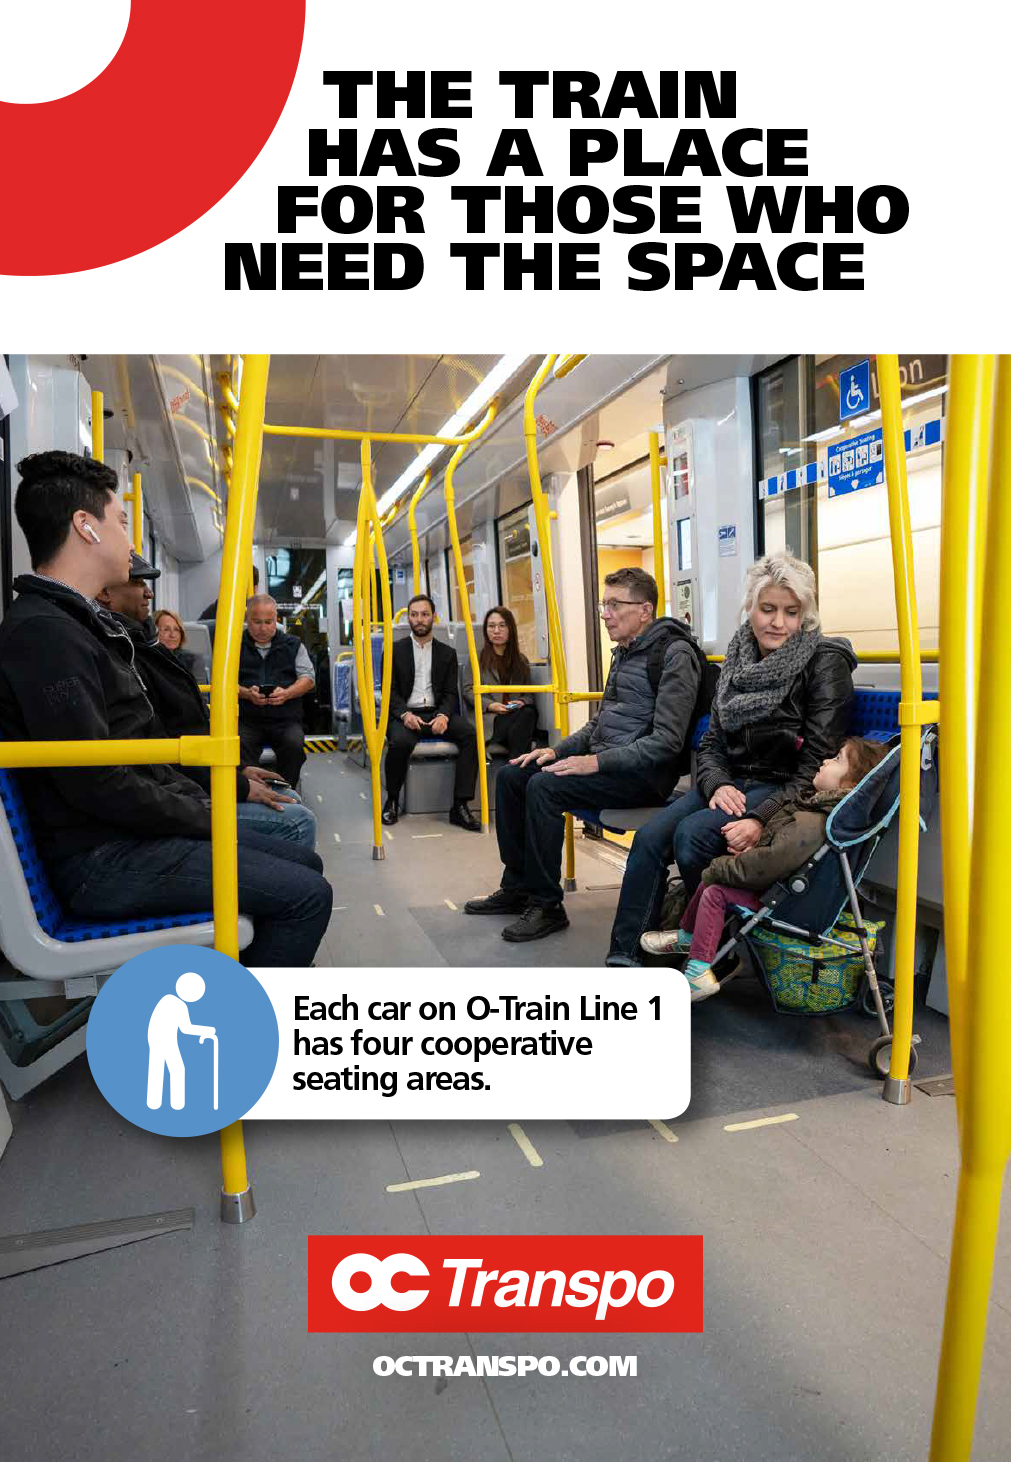 Woman with a child in a stroller seated in the Cooperative seating area. Image text: The train has a place for those who need the space.